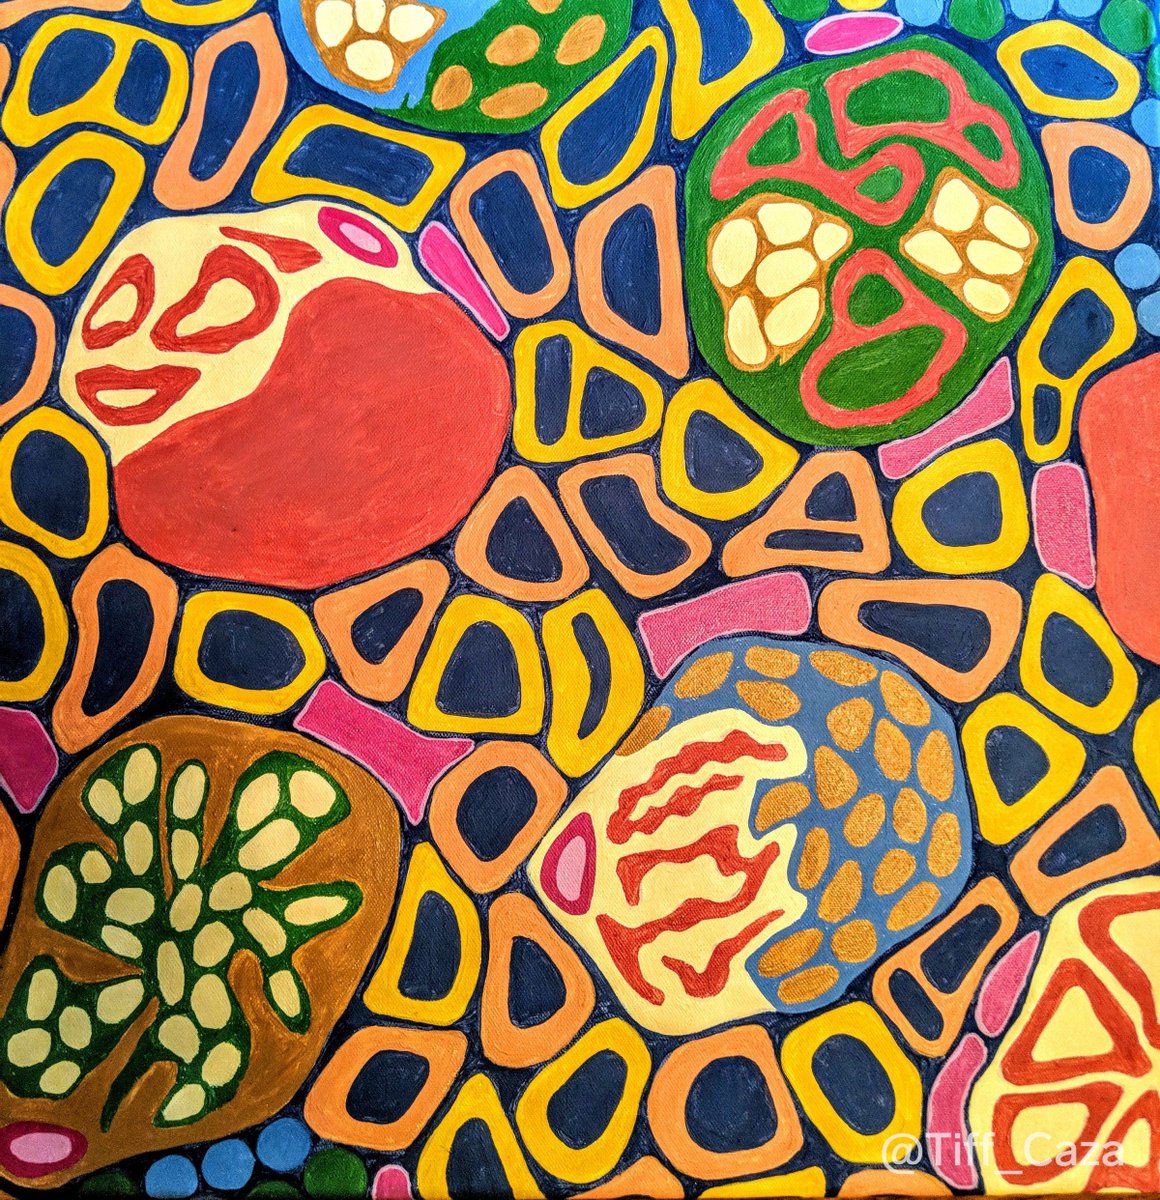 In honor of #IgANDay, we wanted to share this painting by @Tiff_Caza. It shows glomeruli with mesangial hypercellularity, endocapillary hypercellularity, and crescent formation. These findings can be seen in IgA nephropathy, and other active glomerulonephritides. These